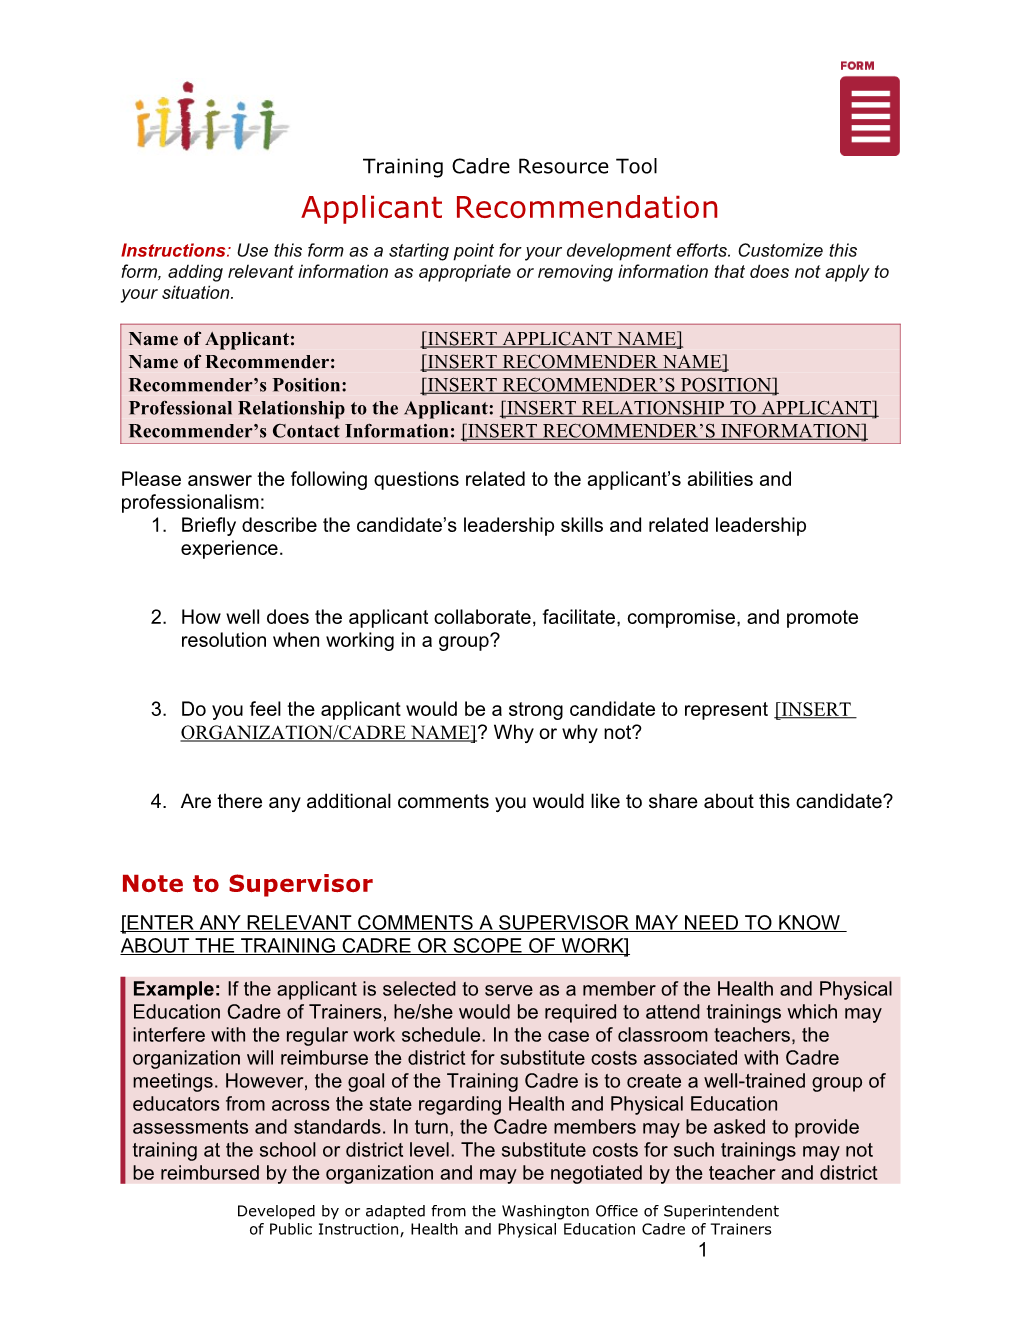 Applicant Recommendation